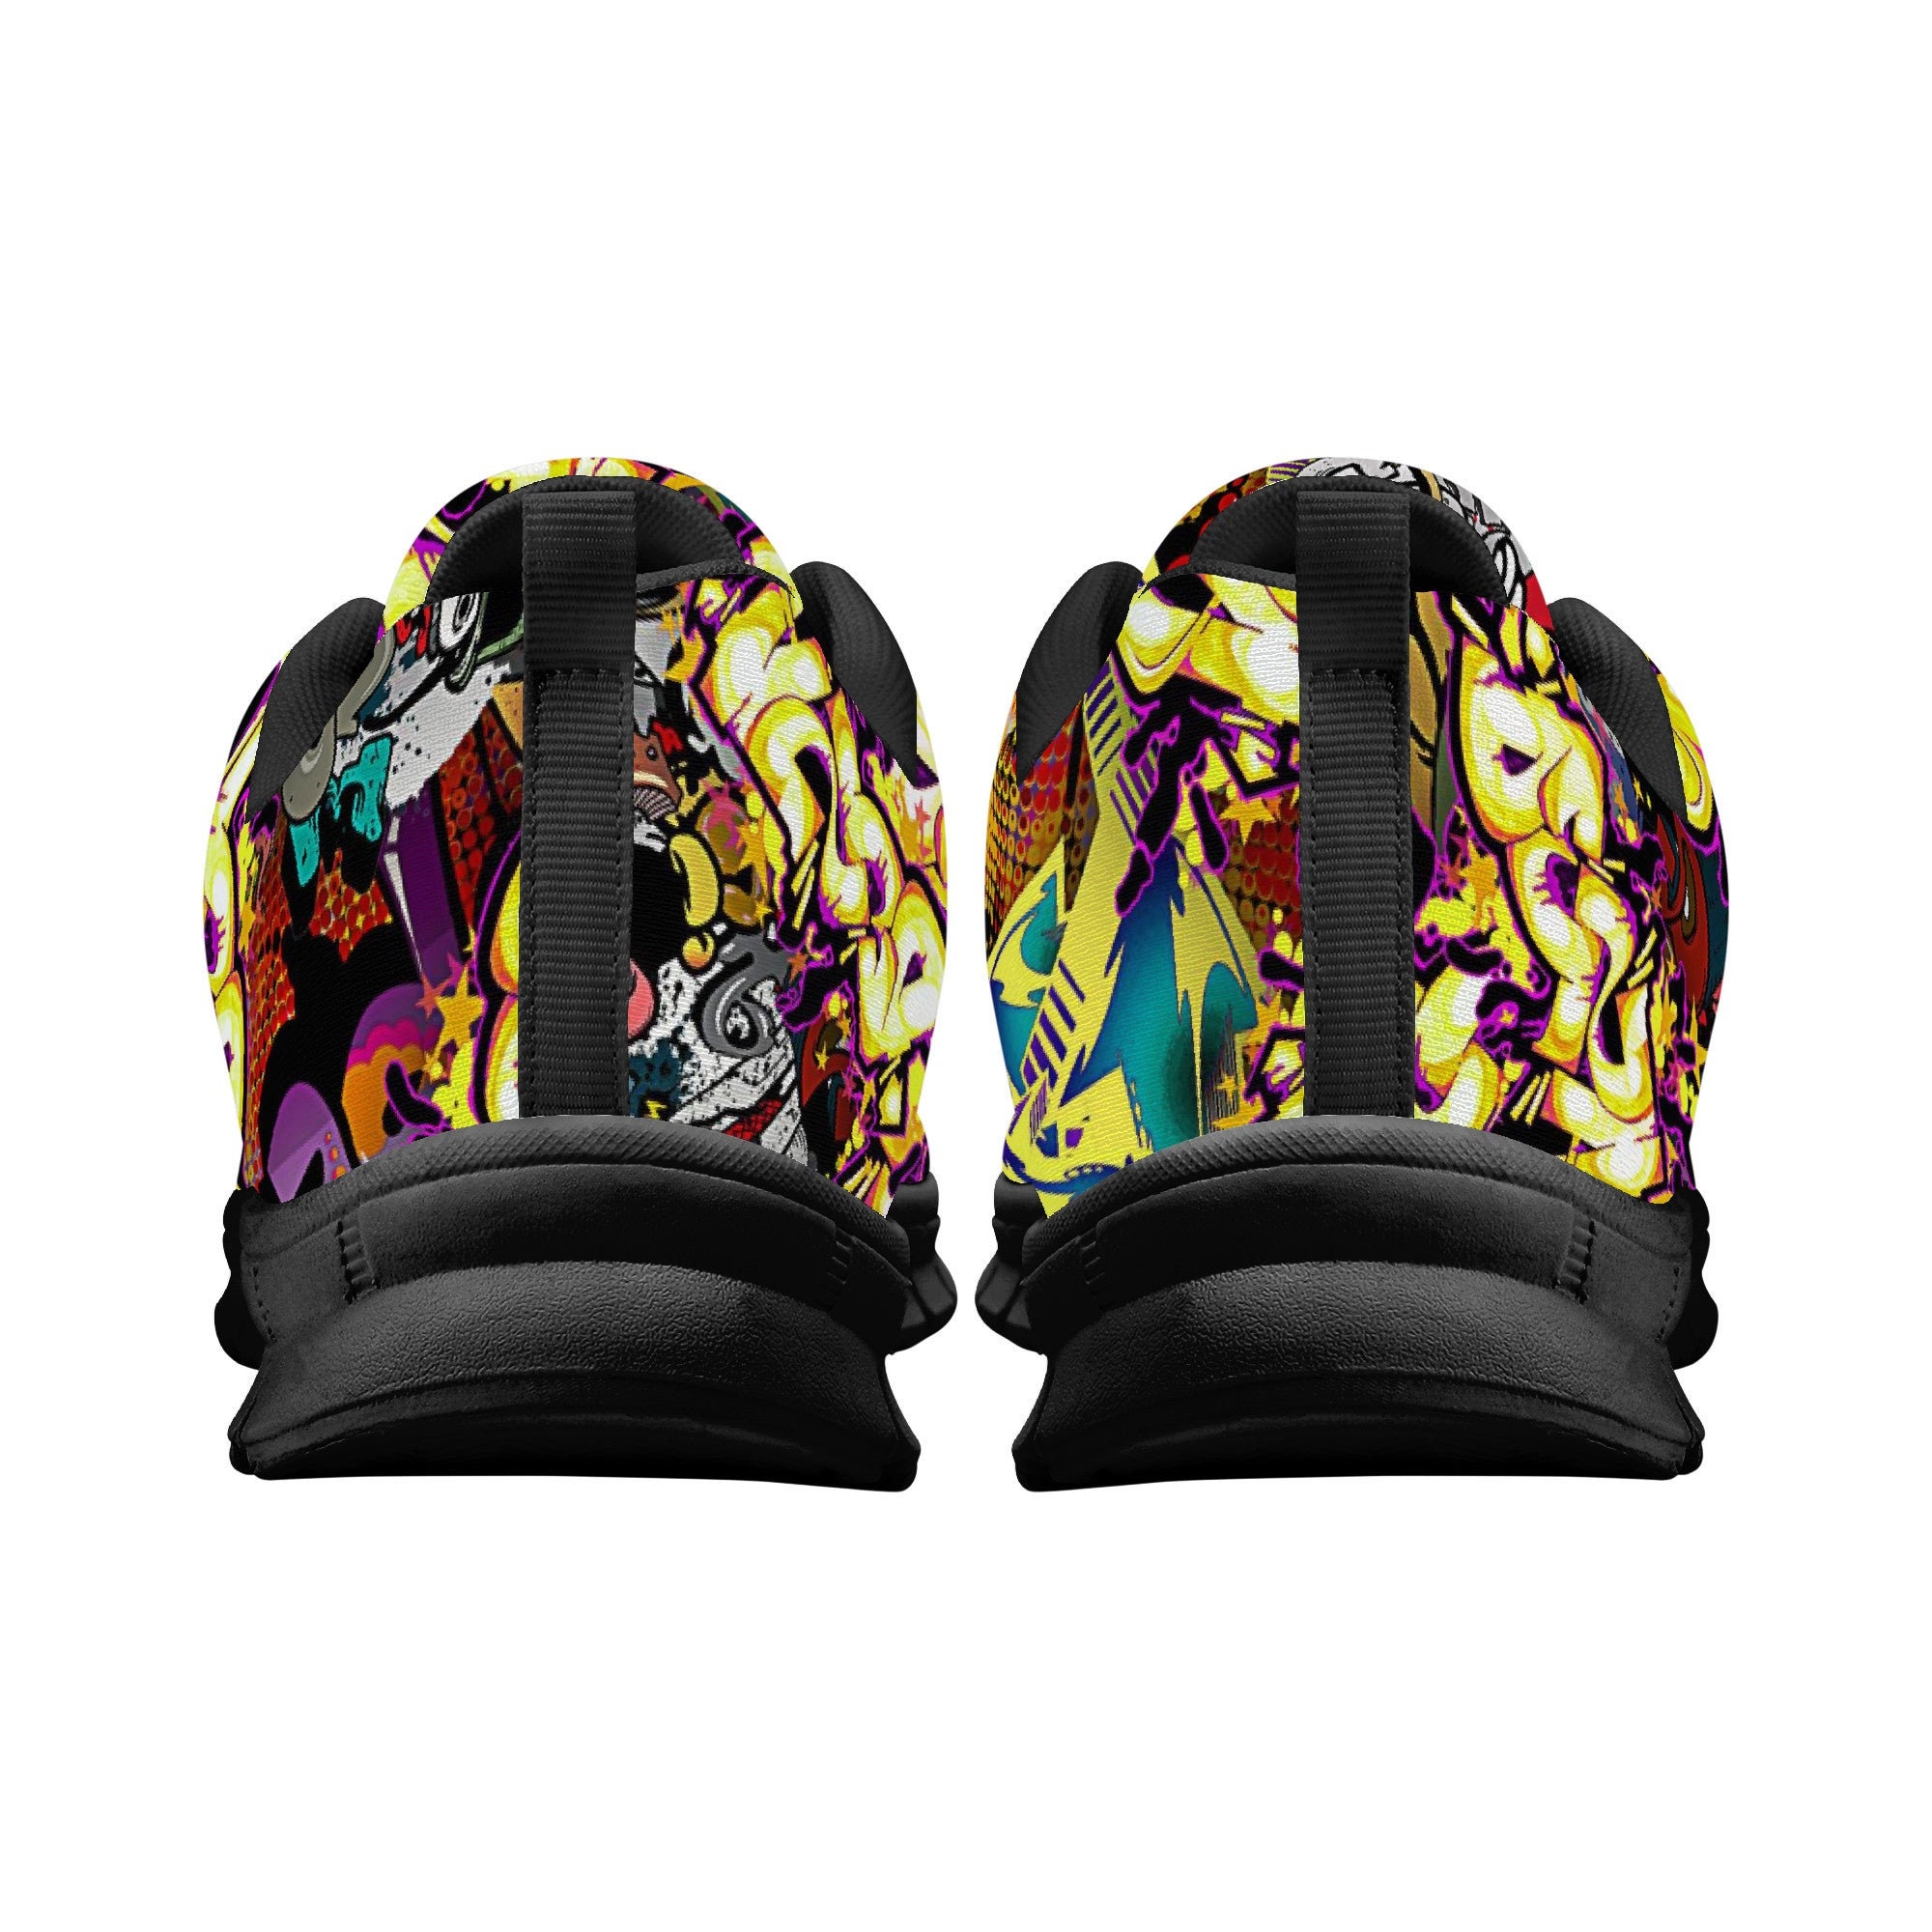 1980s Graffiti-Inspired Sneakers: Psychedelic Boots From Louis